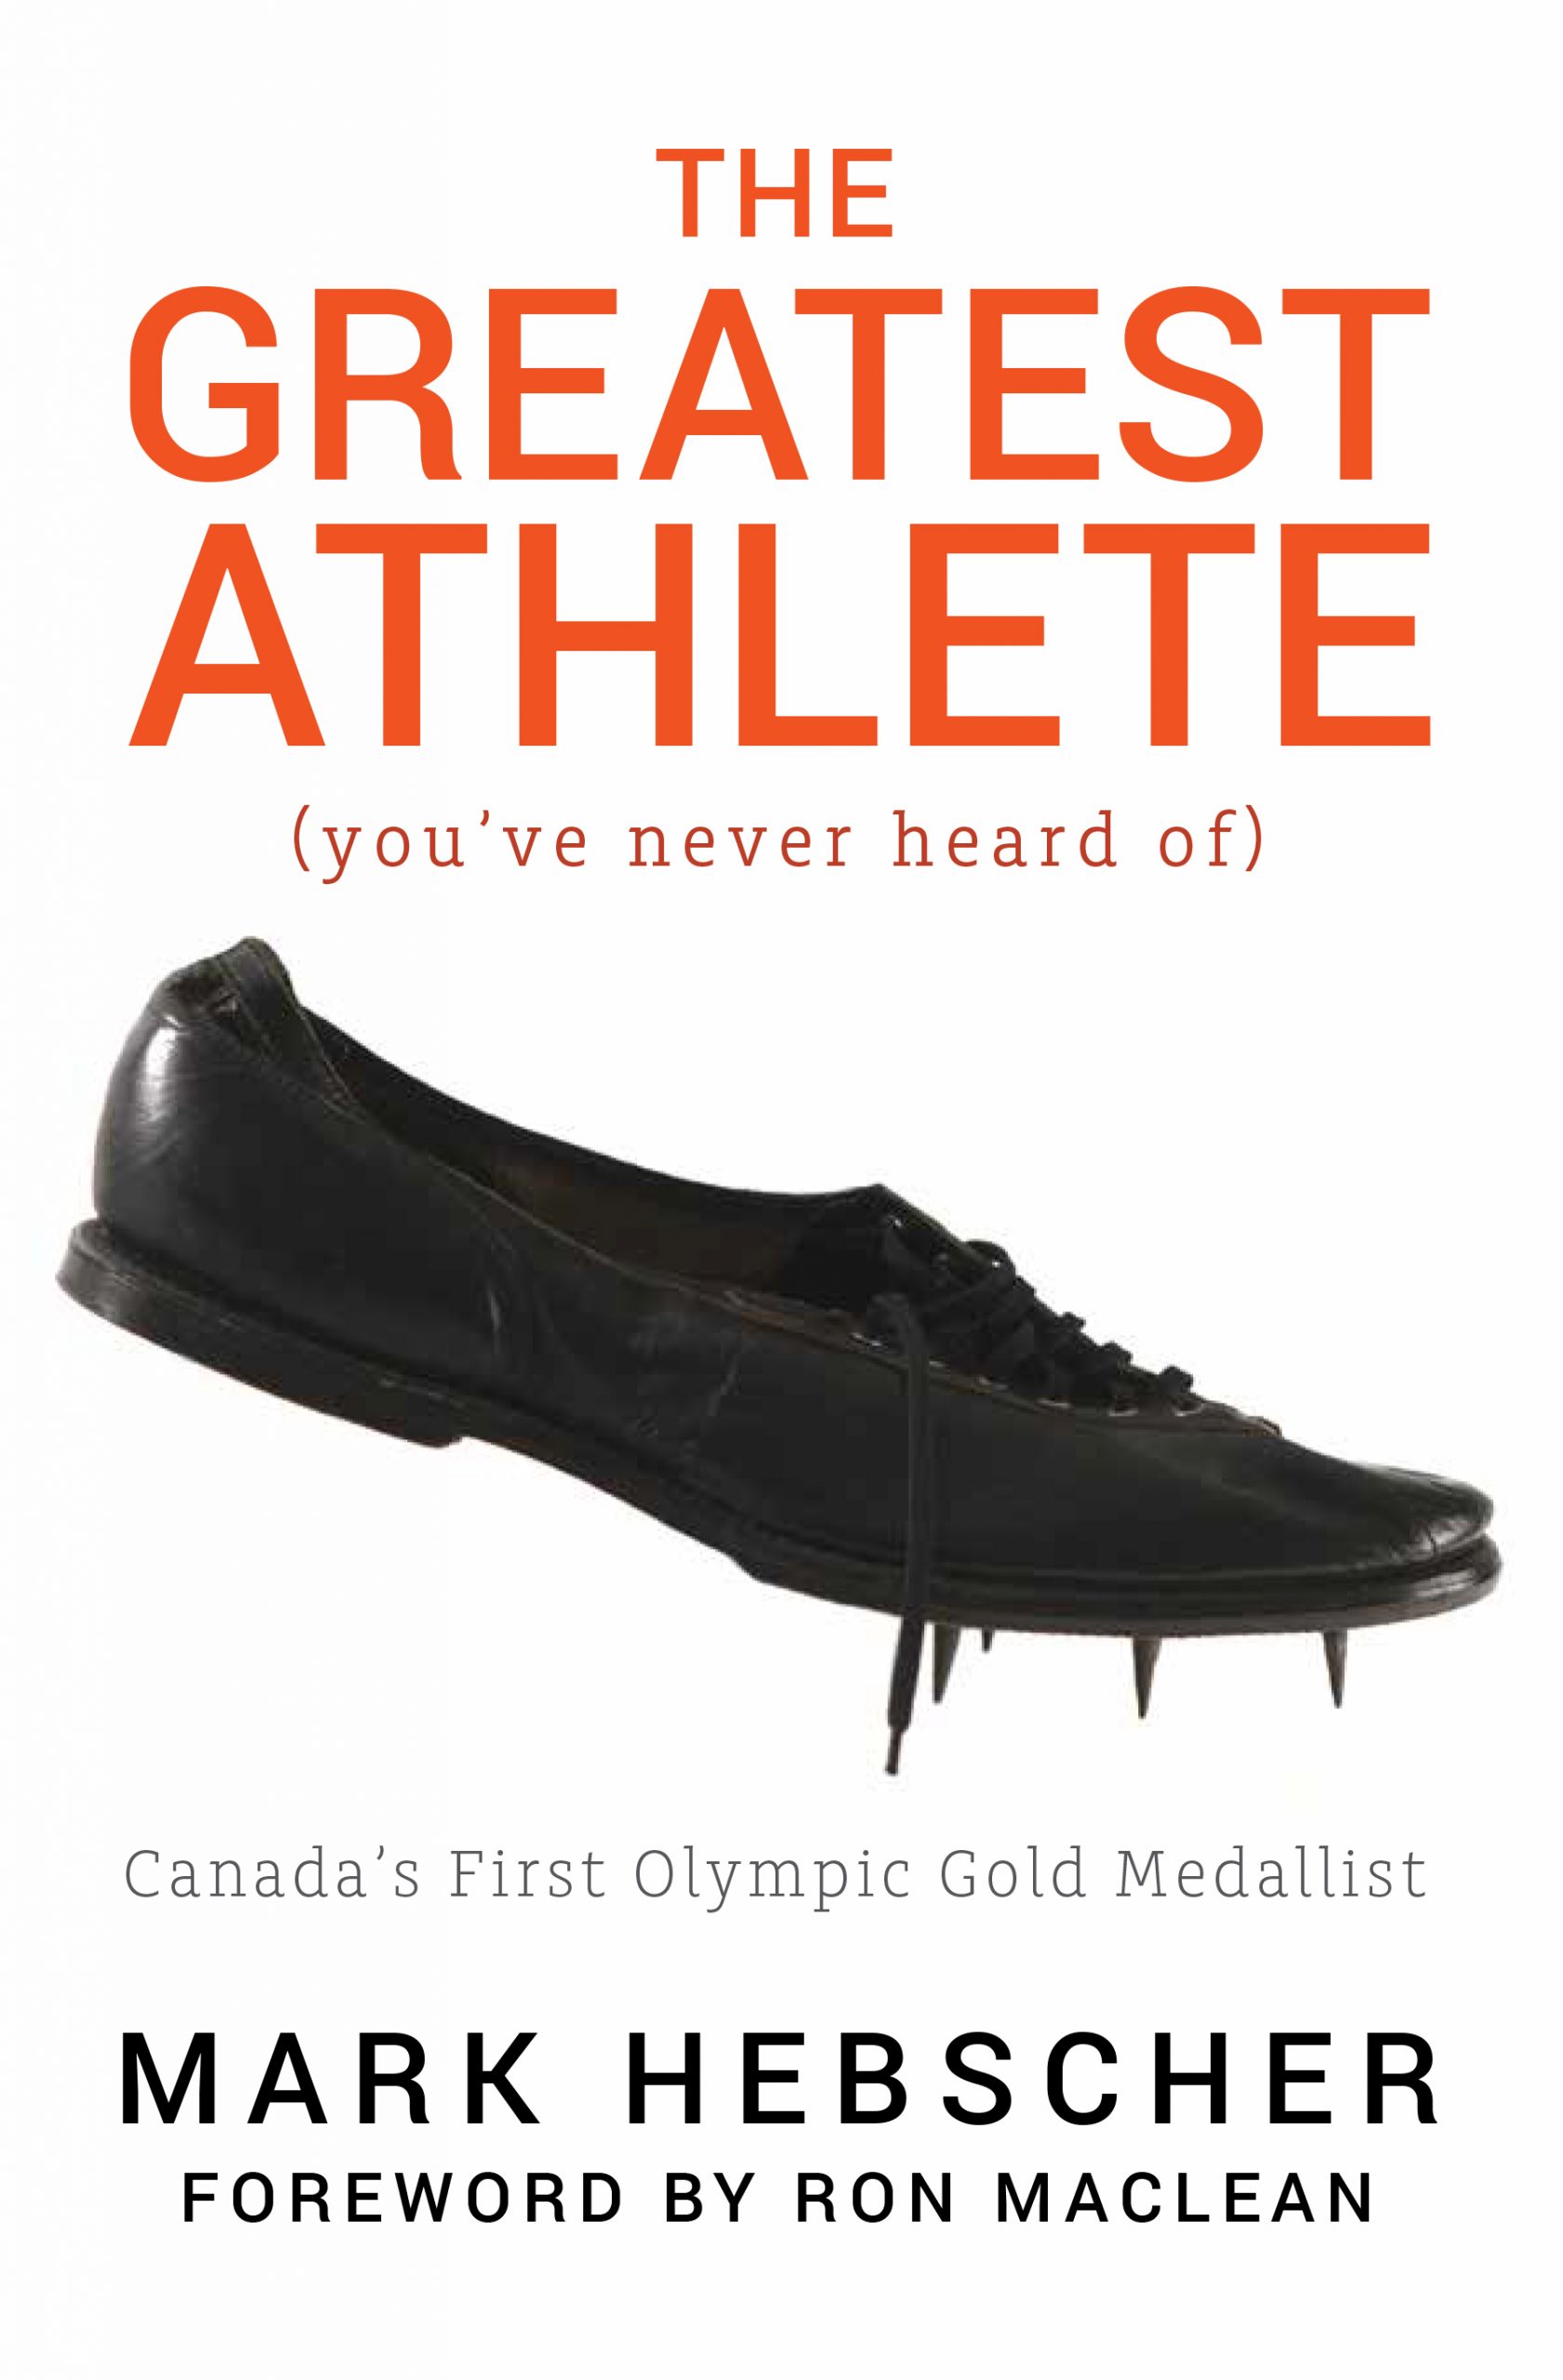 Cover of The Greatest Athlete (you’ve never heard of) – Canada’s First Olympic Gold Medallist